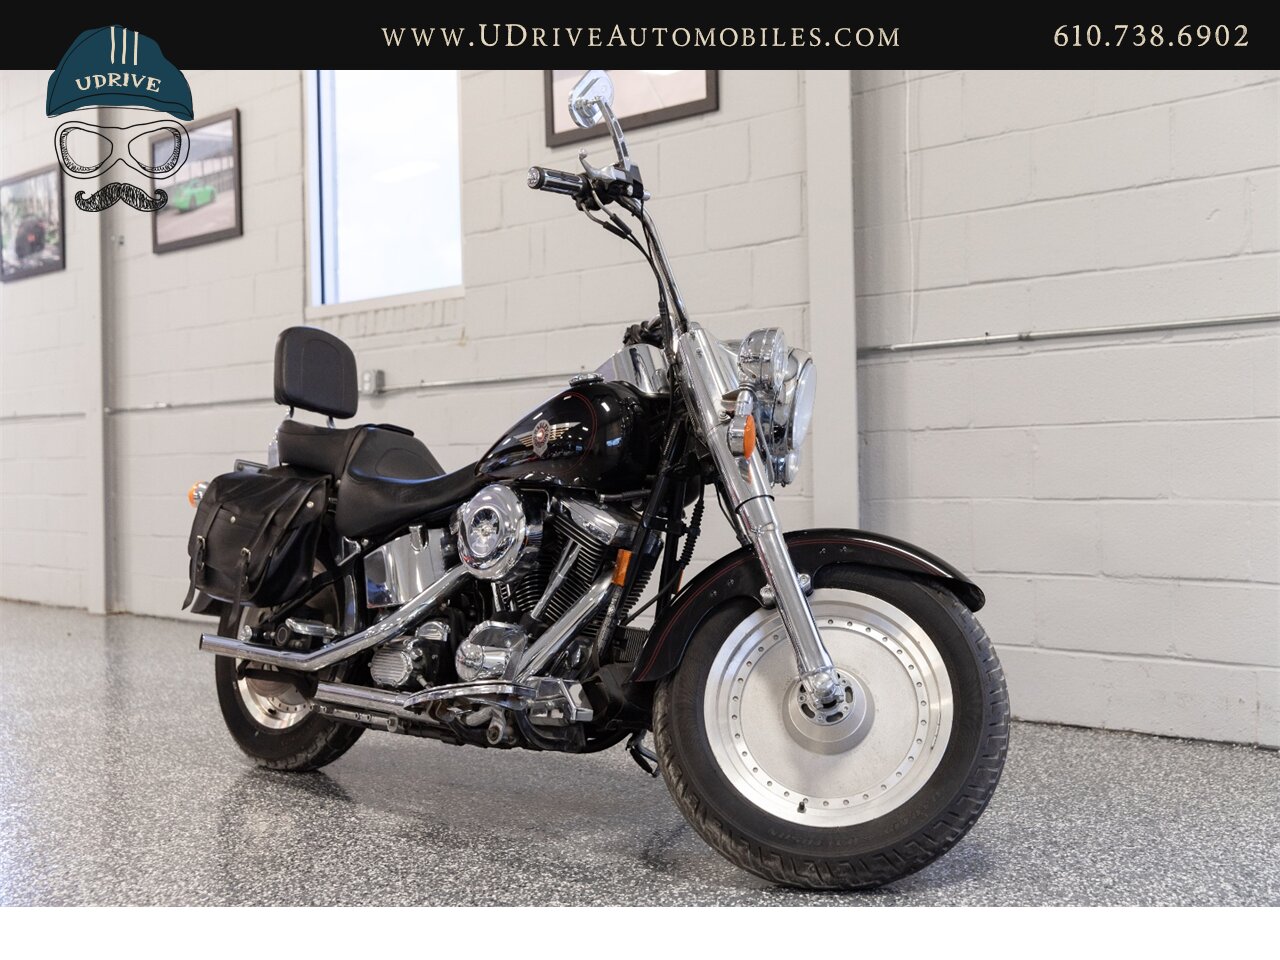 1999 Harley-Davidson Touring FLSTF Fatboy 2k Miles 1 Owner   - Photo 2 - West Chester, PA 19382